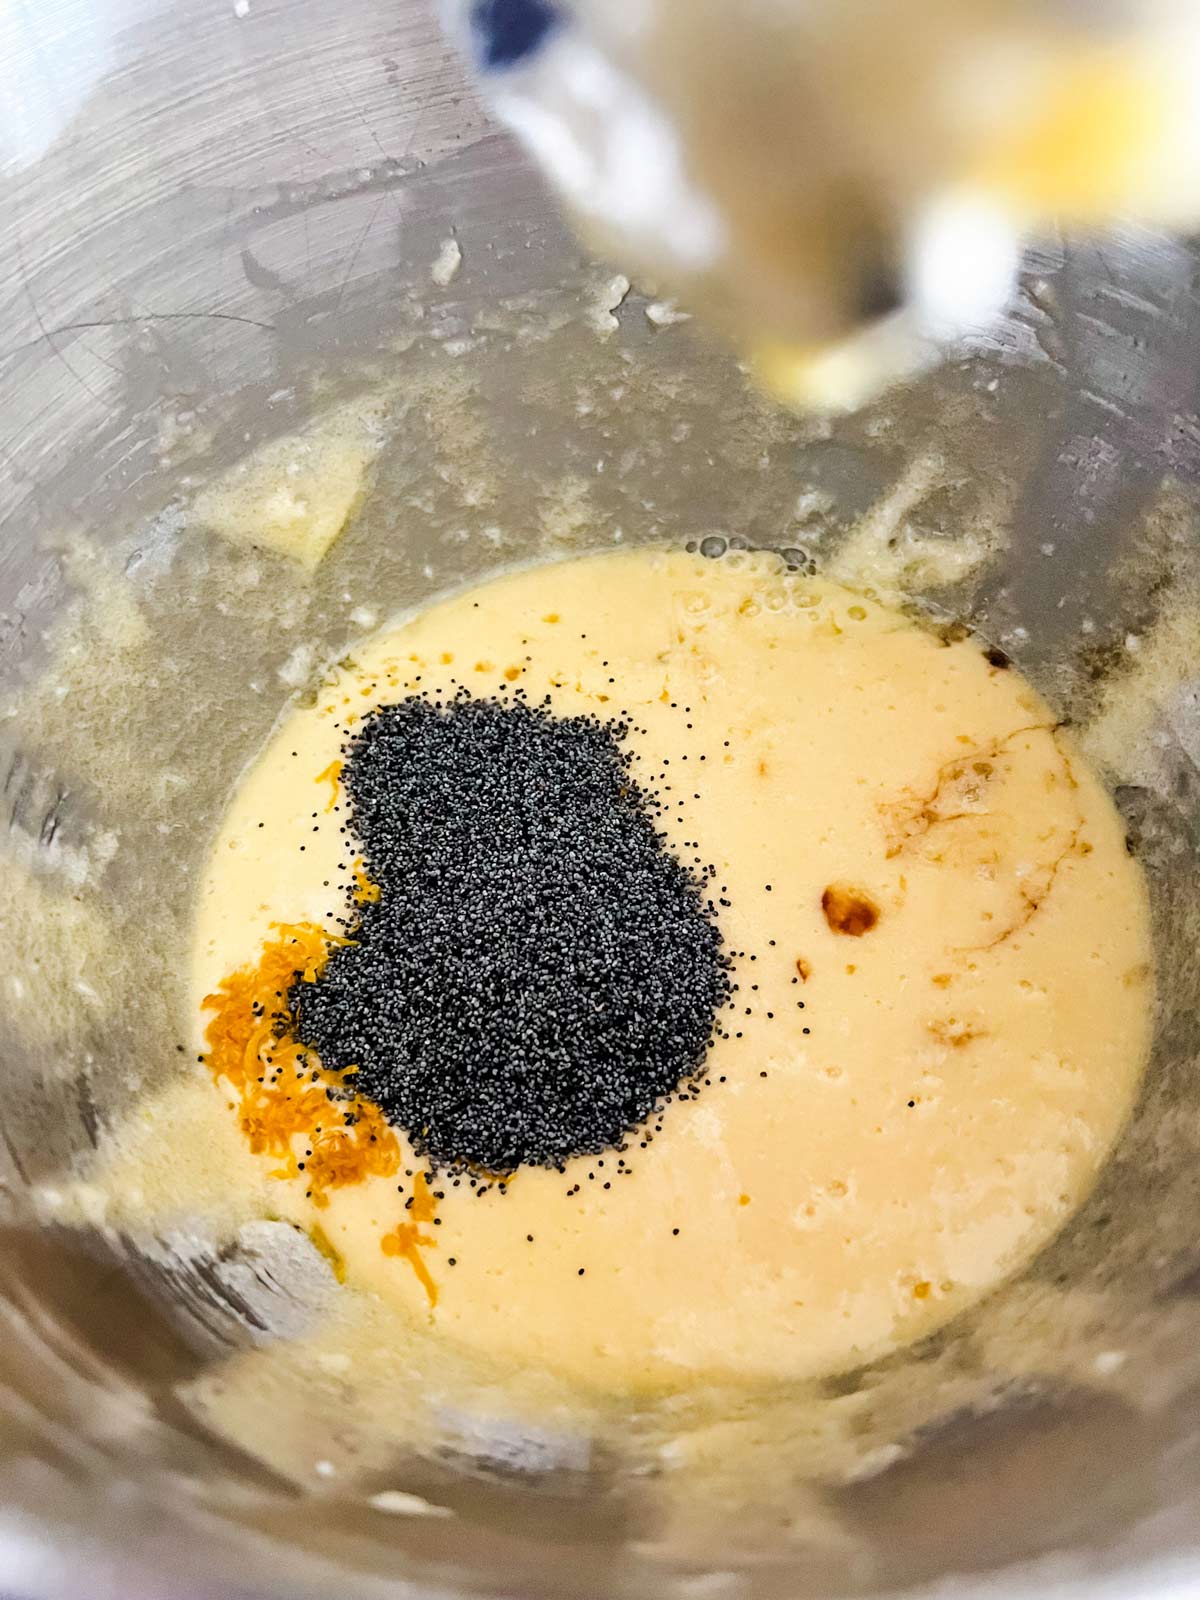  lemon juice, zest, vanilla extract, and poppy seeds being added to eggs, butter, and sugar.